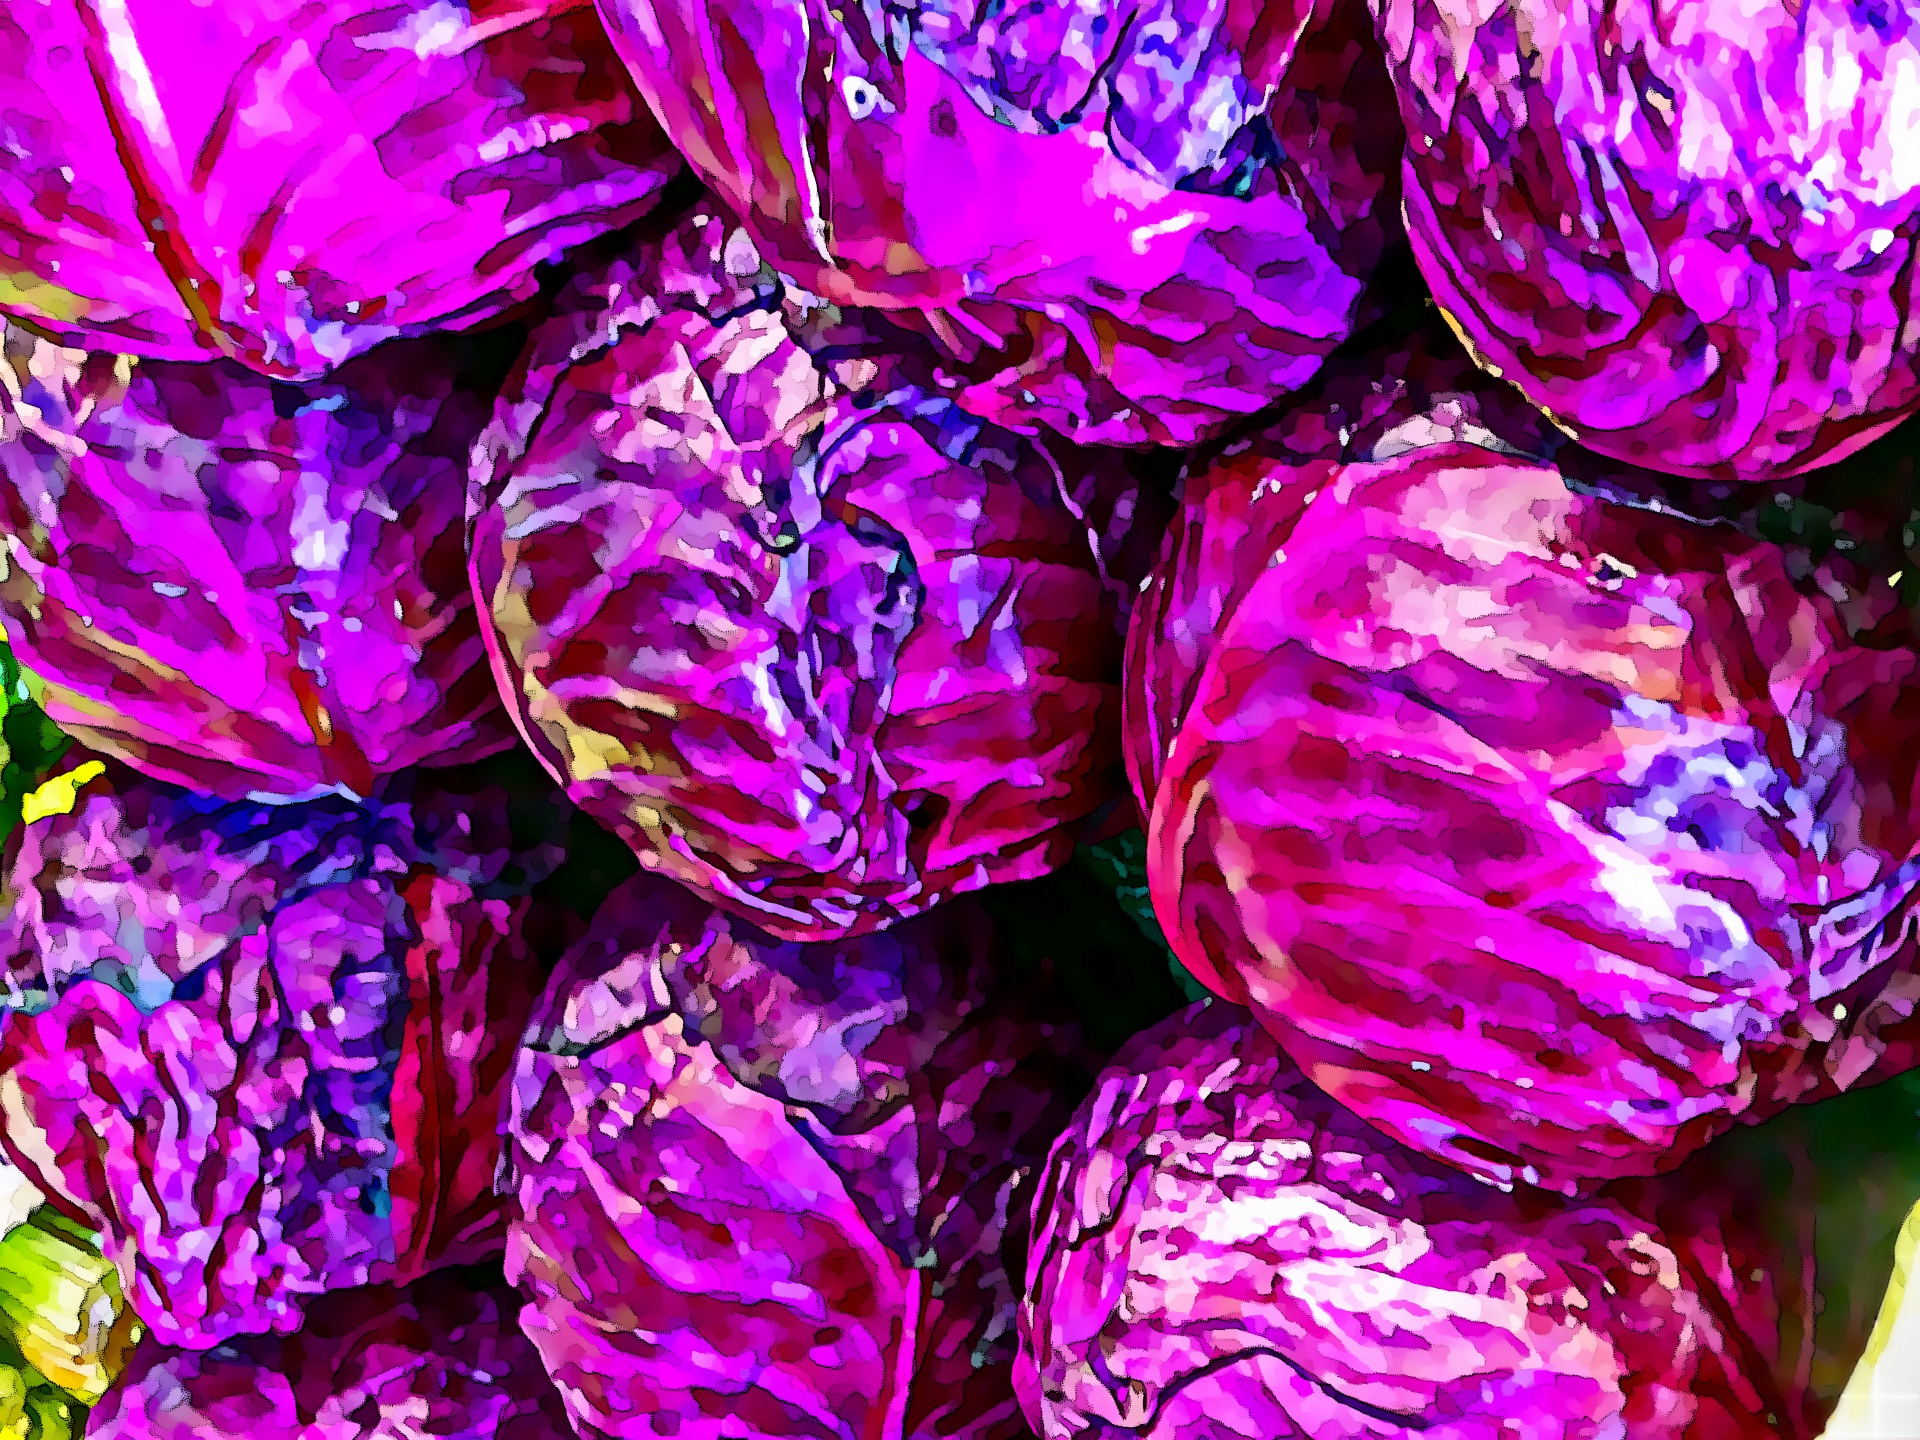 Painted Red Cabbage